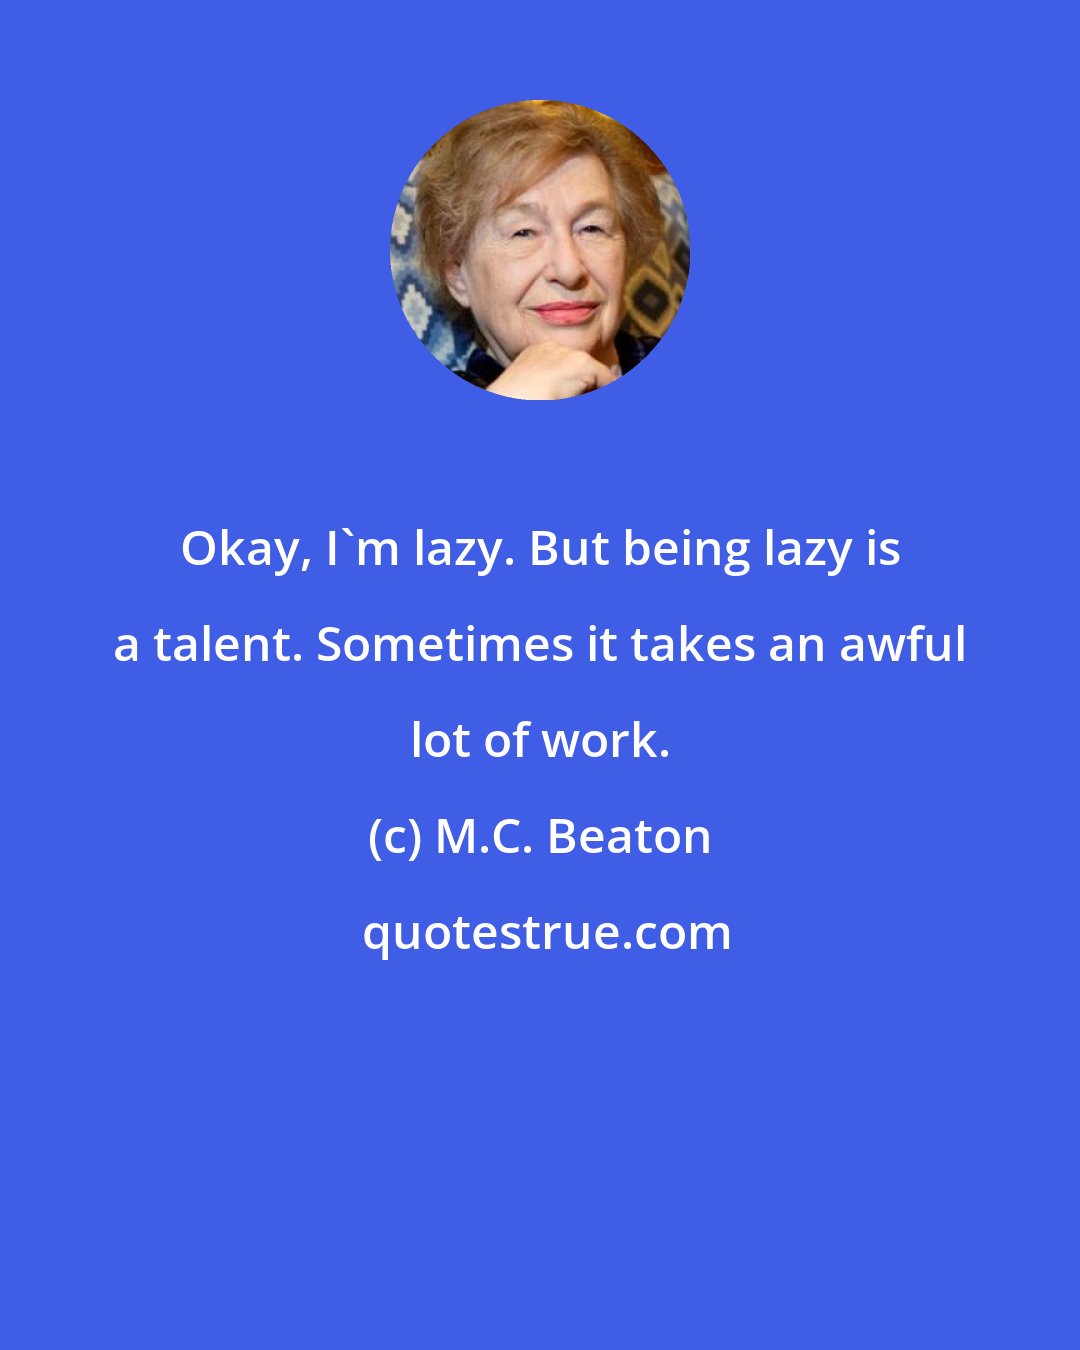 M.C. Beaton: Okay, I'm lazy. But being lazy is a talent. Sometimes it takes an awful lot of work.